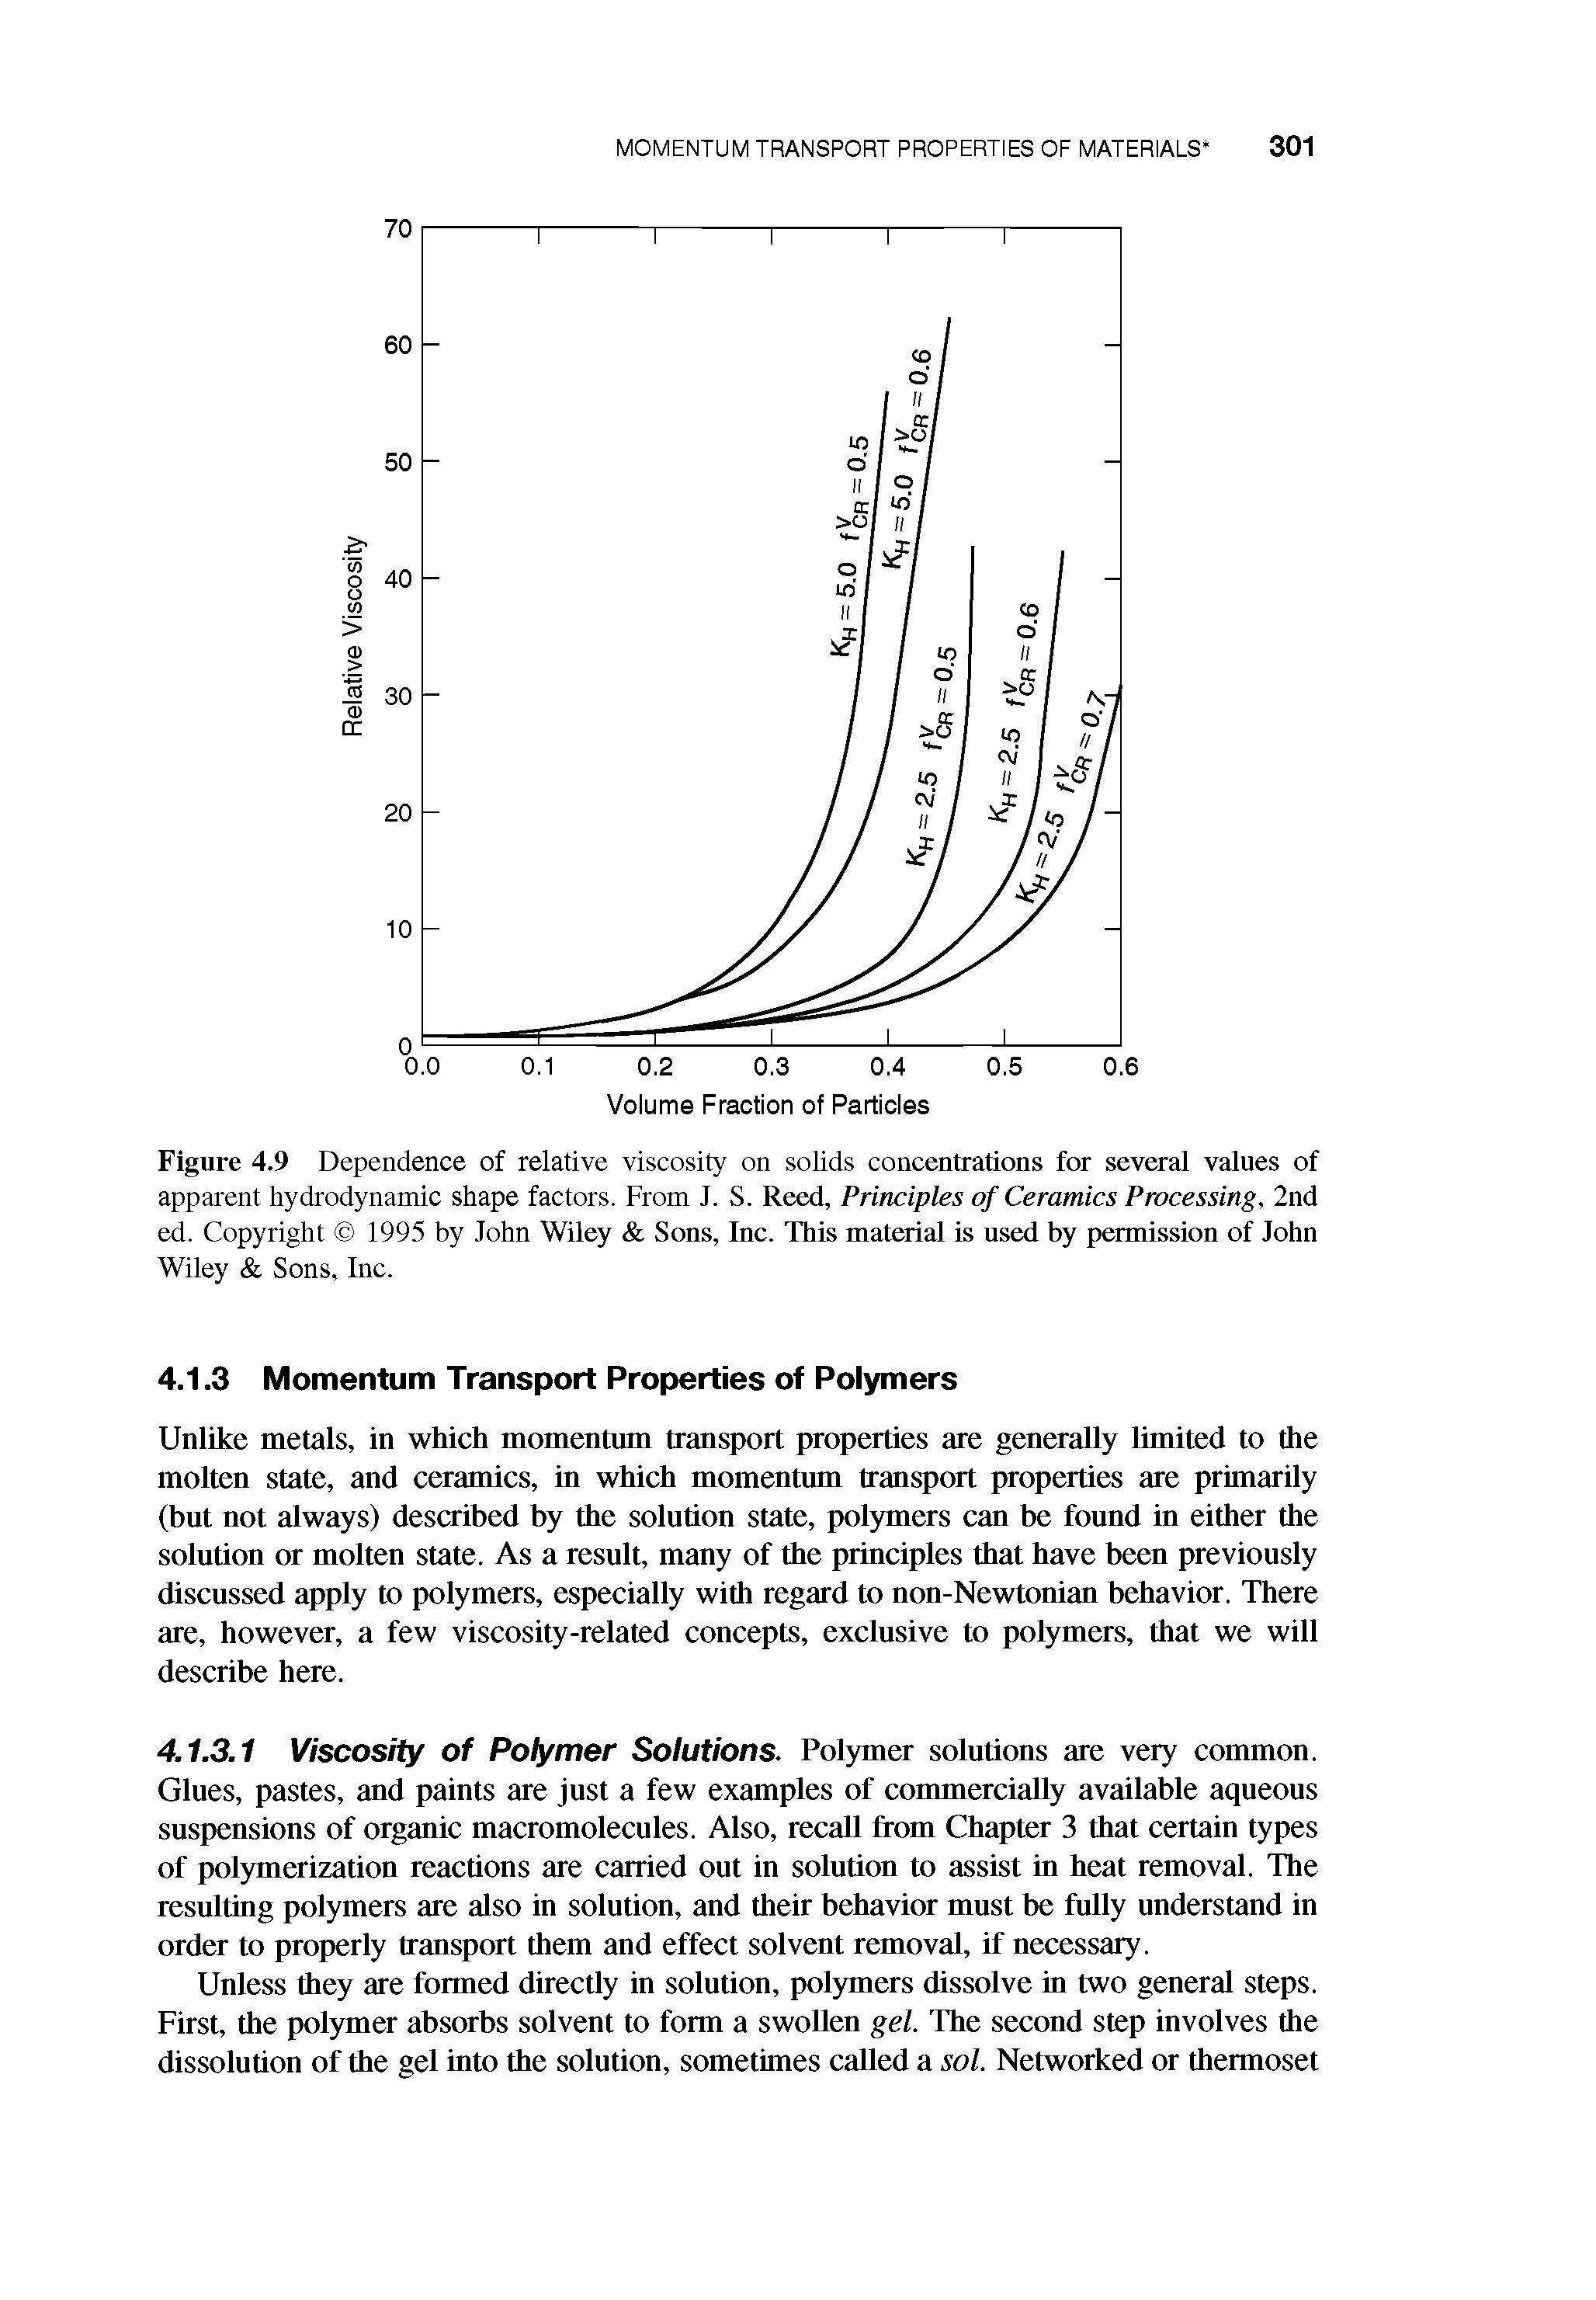 Figure 4.9 Dependence of relative viscosity on solids concentrations for several values of apparent hydrodynamic shape factors. From J. S. Reed, Principles of Ceramics Processing, 2nd ed. Copyright 1995 by John Wiley Sons, Inc. This material is used by permission of John Wiley Sons, Inc.